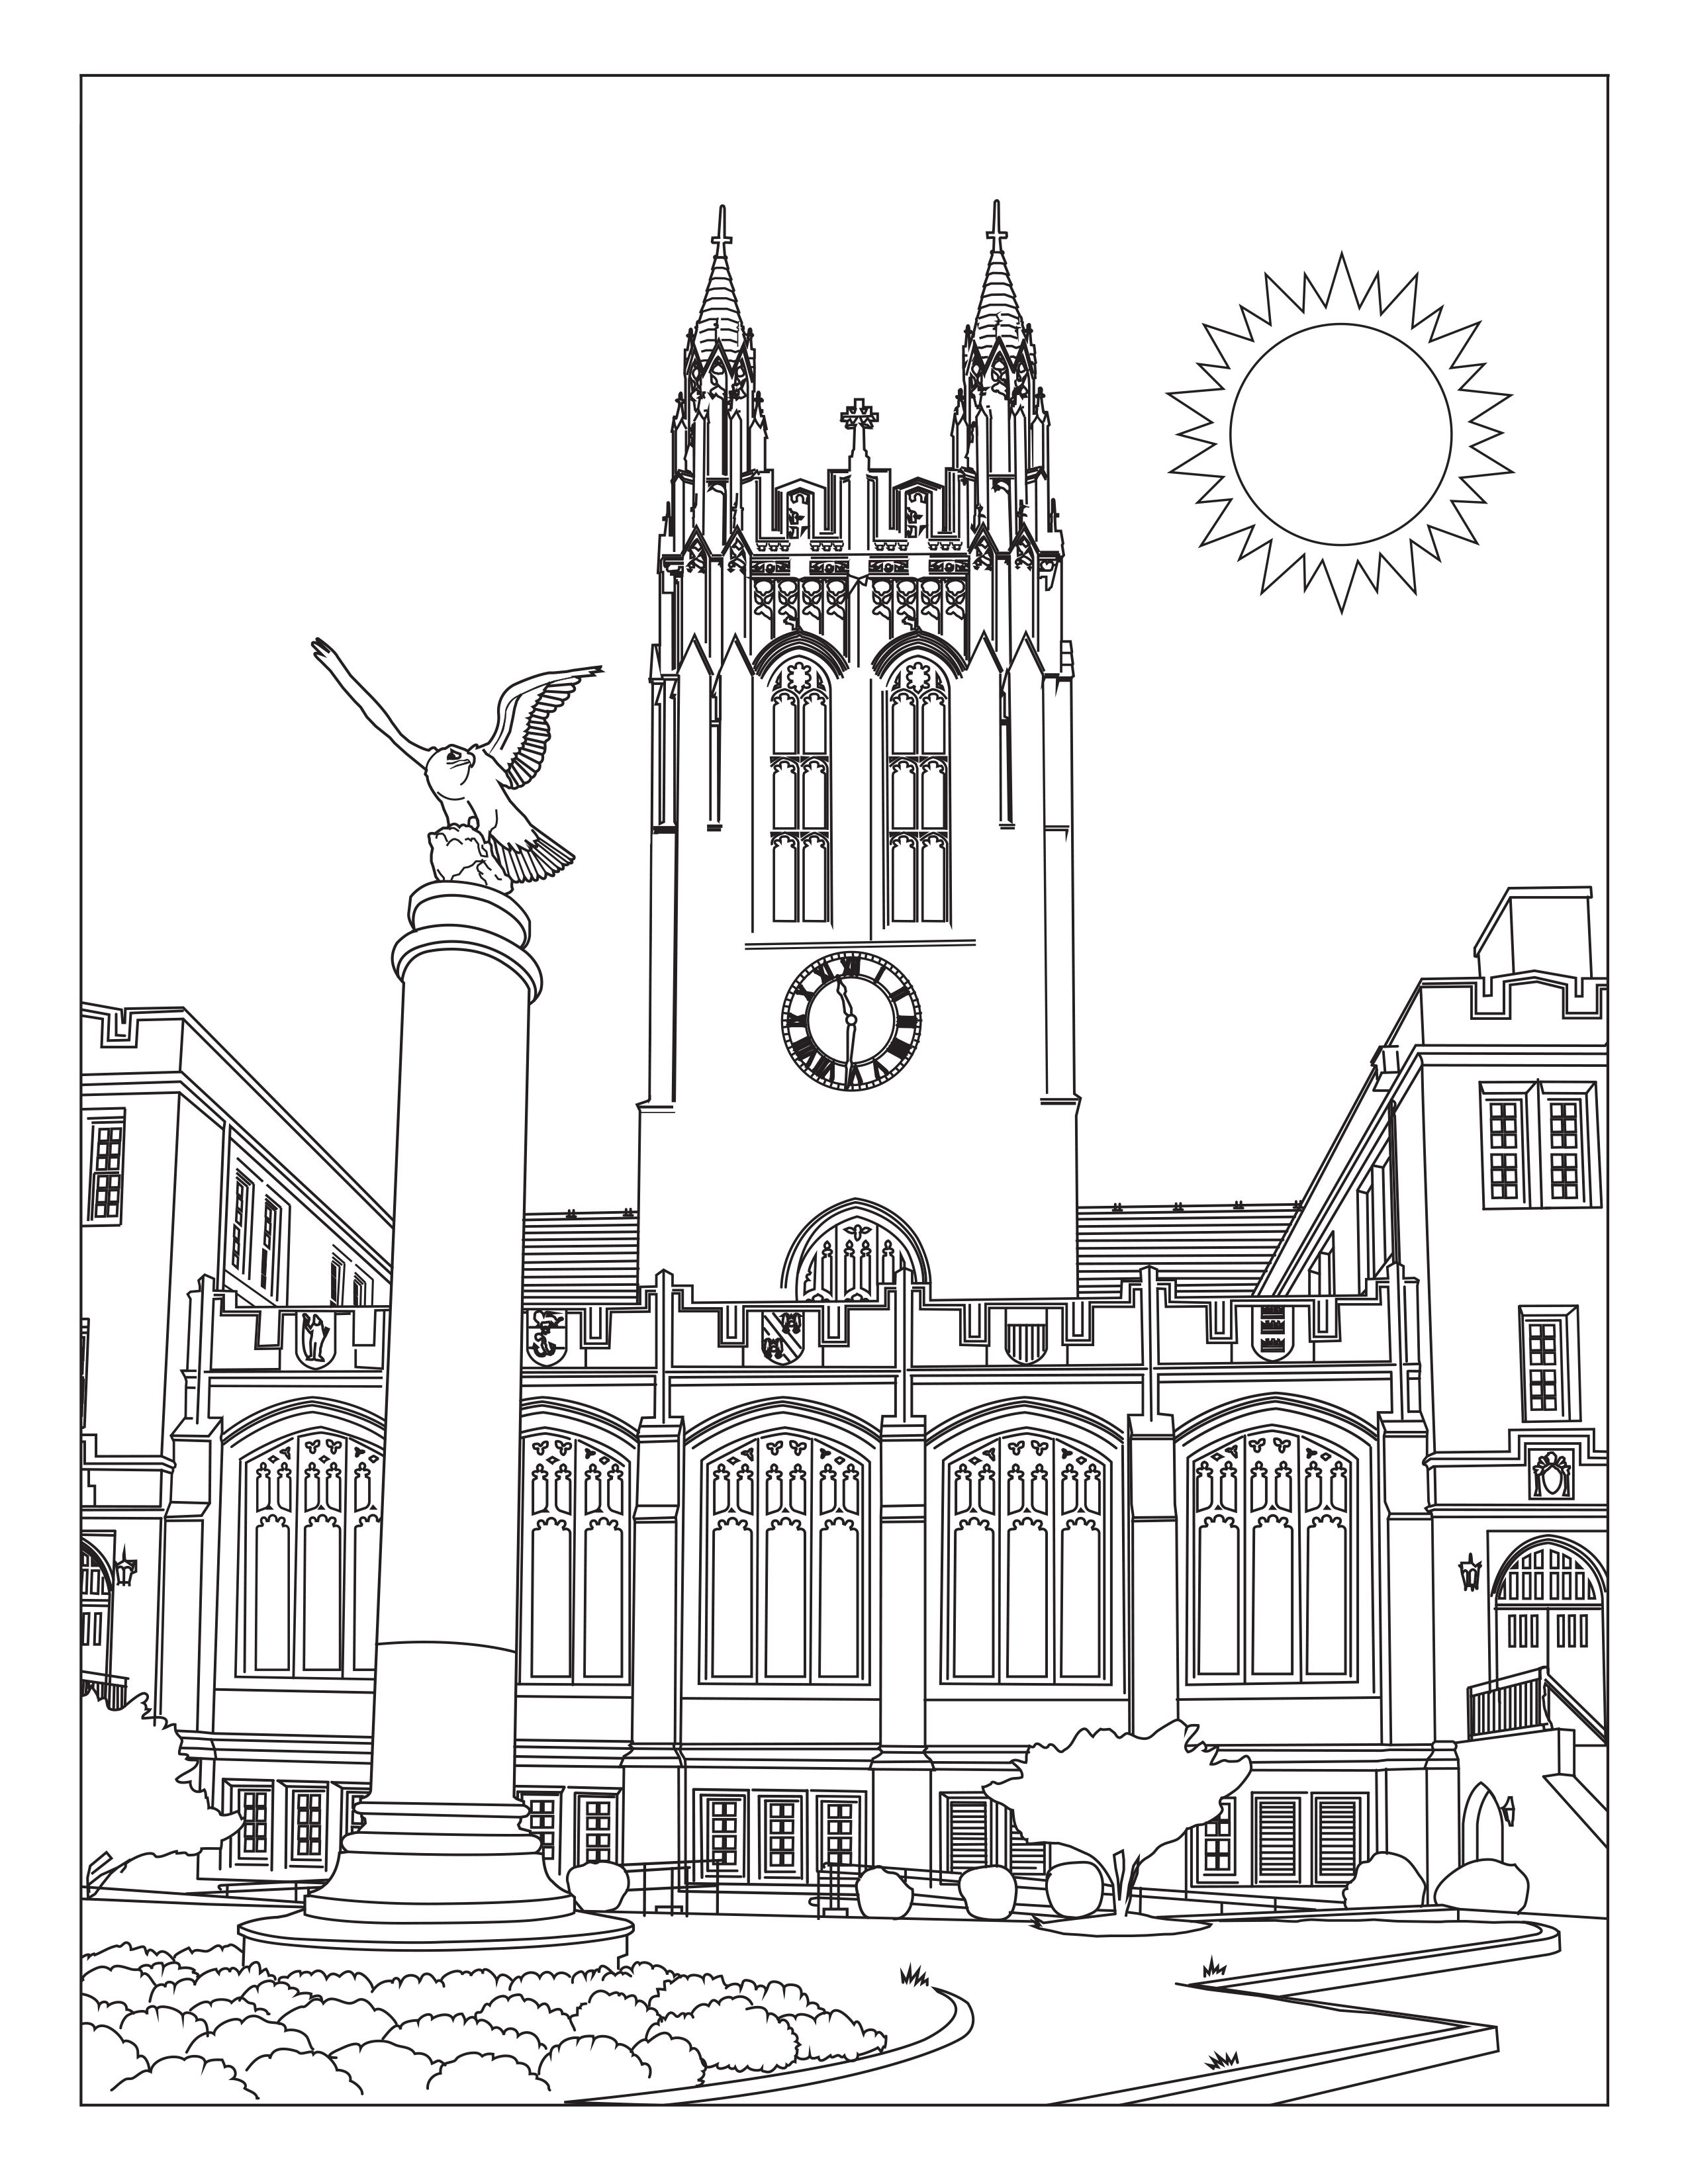 Gasson Hall Coloring Page | Screen printing, Coloring pages, Prints